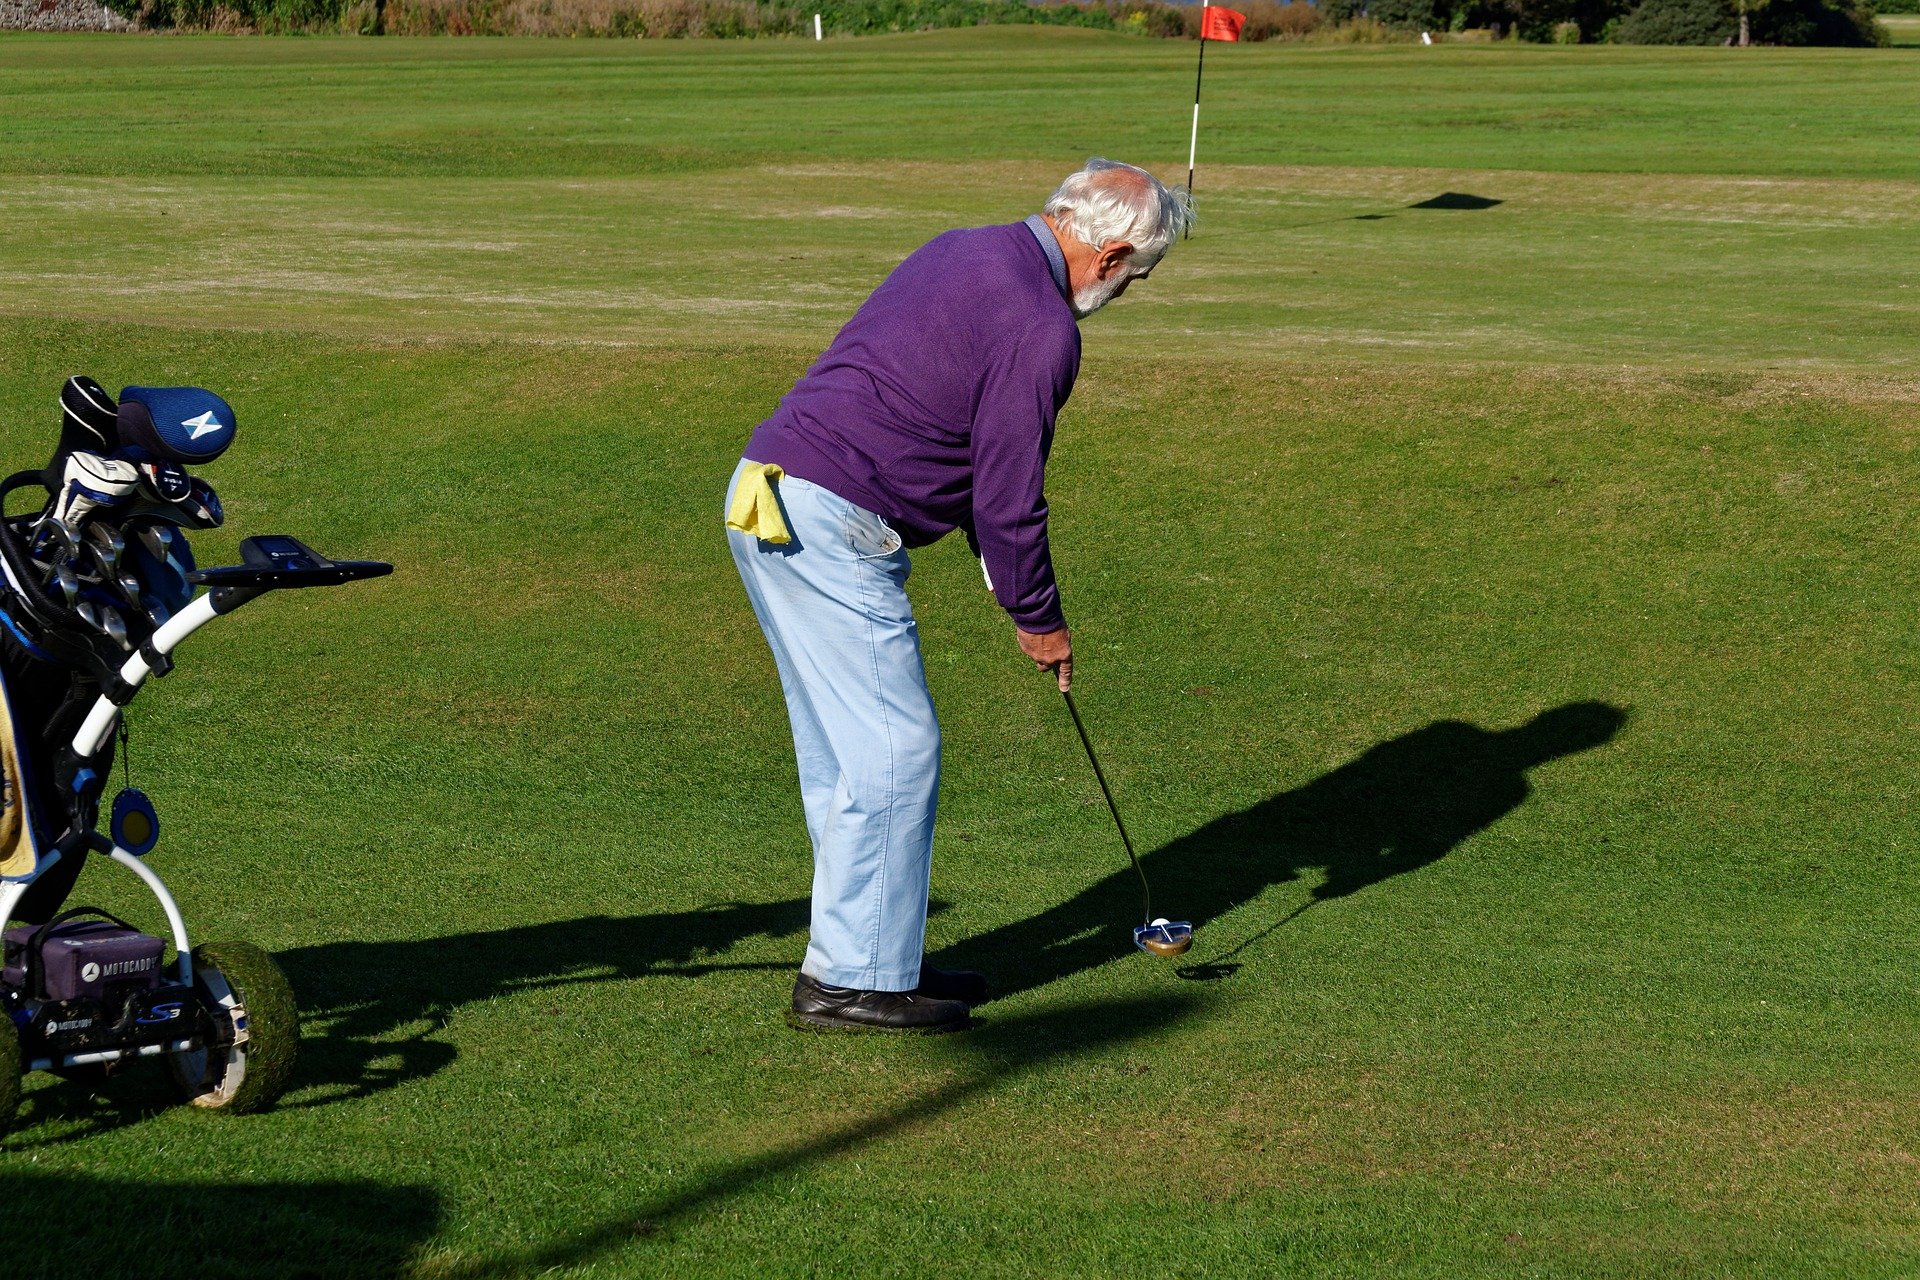 A gentleman with gray hair putting on a golf course. | Source: Pixabay/KevinPhillips.